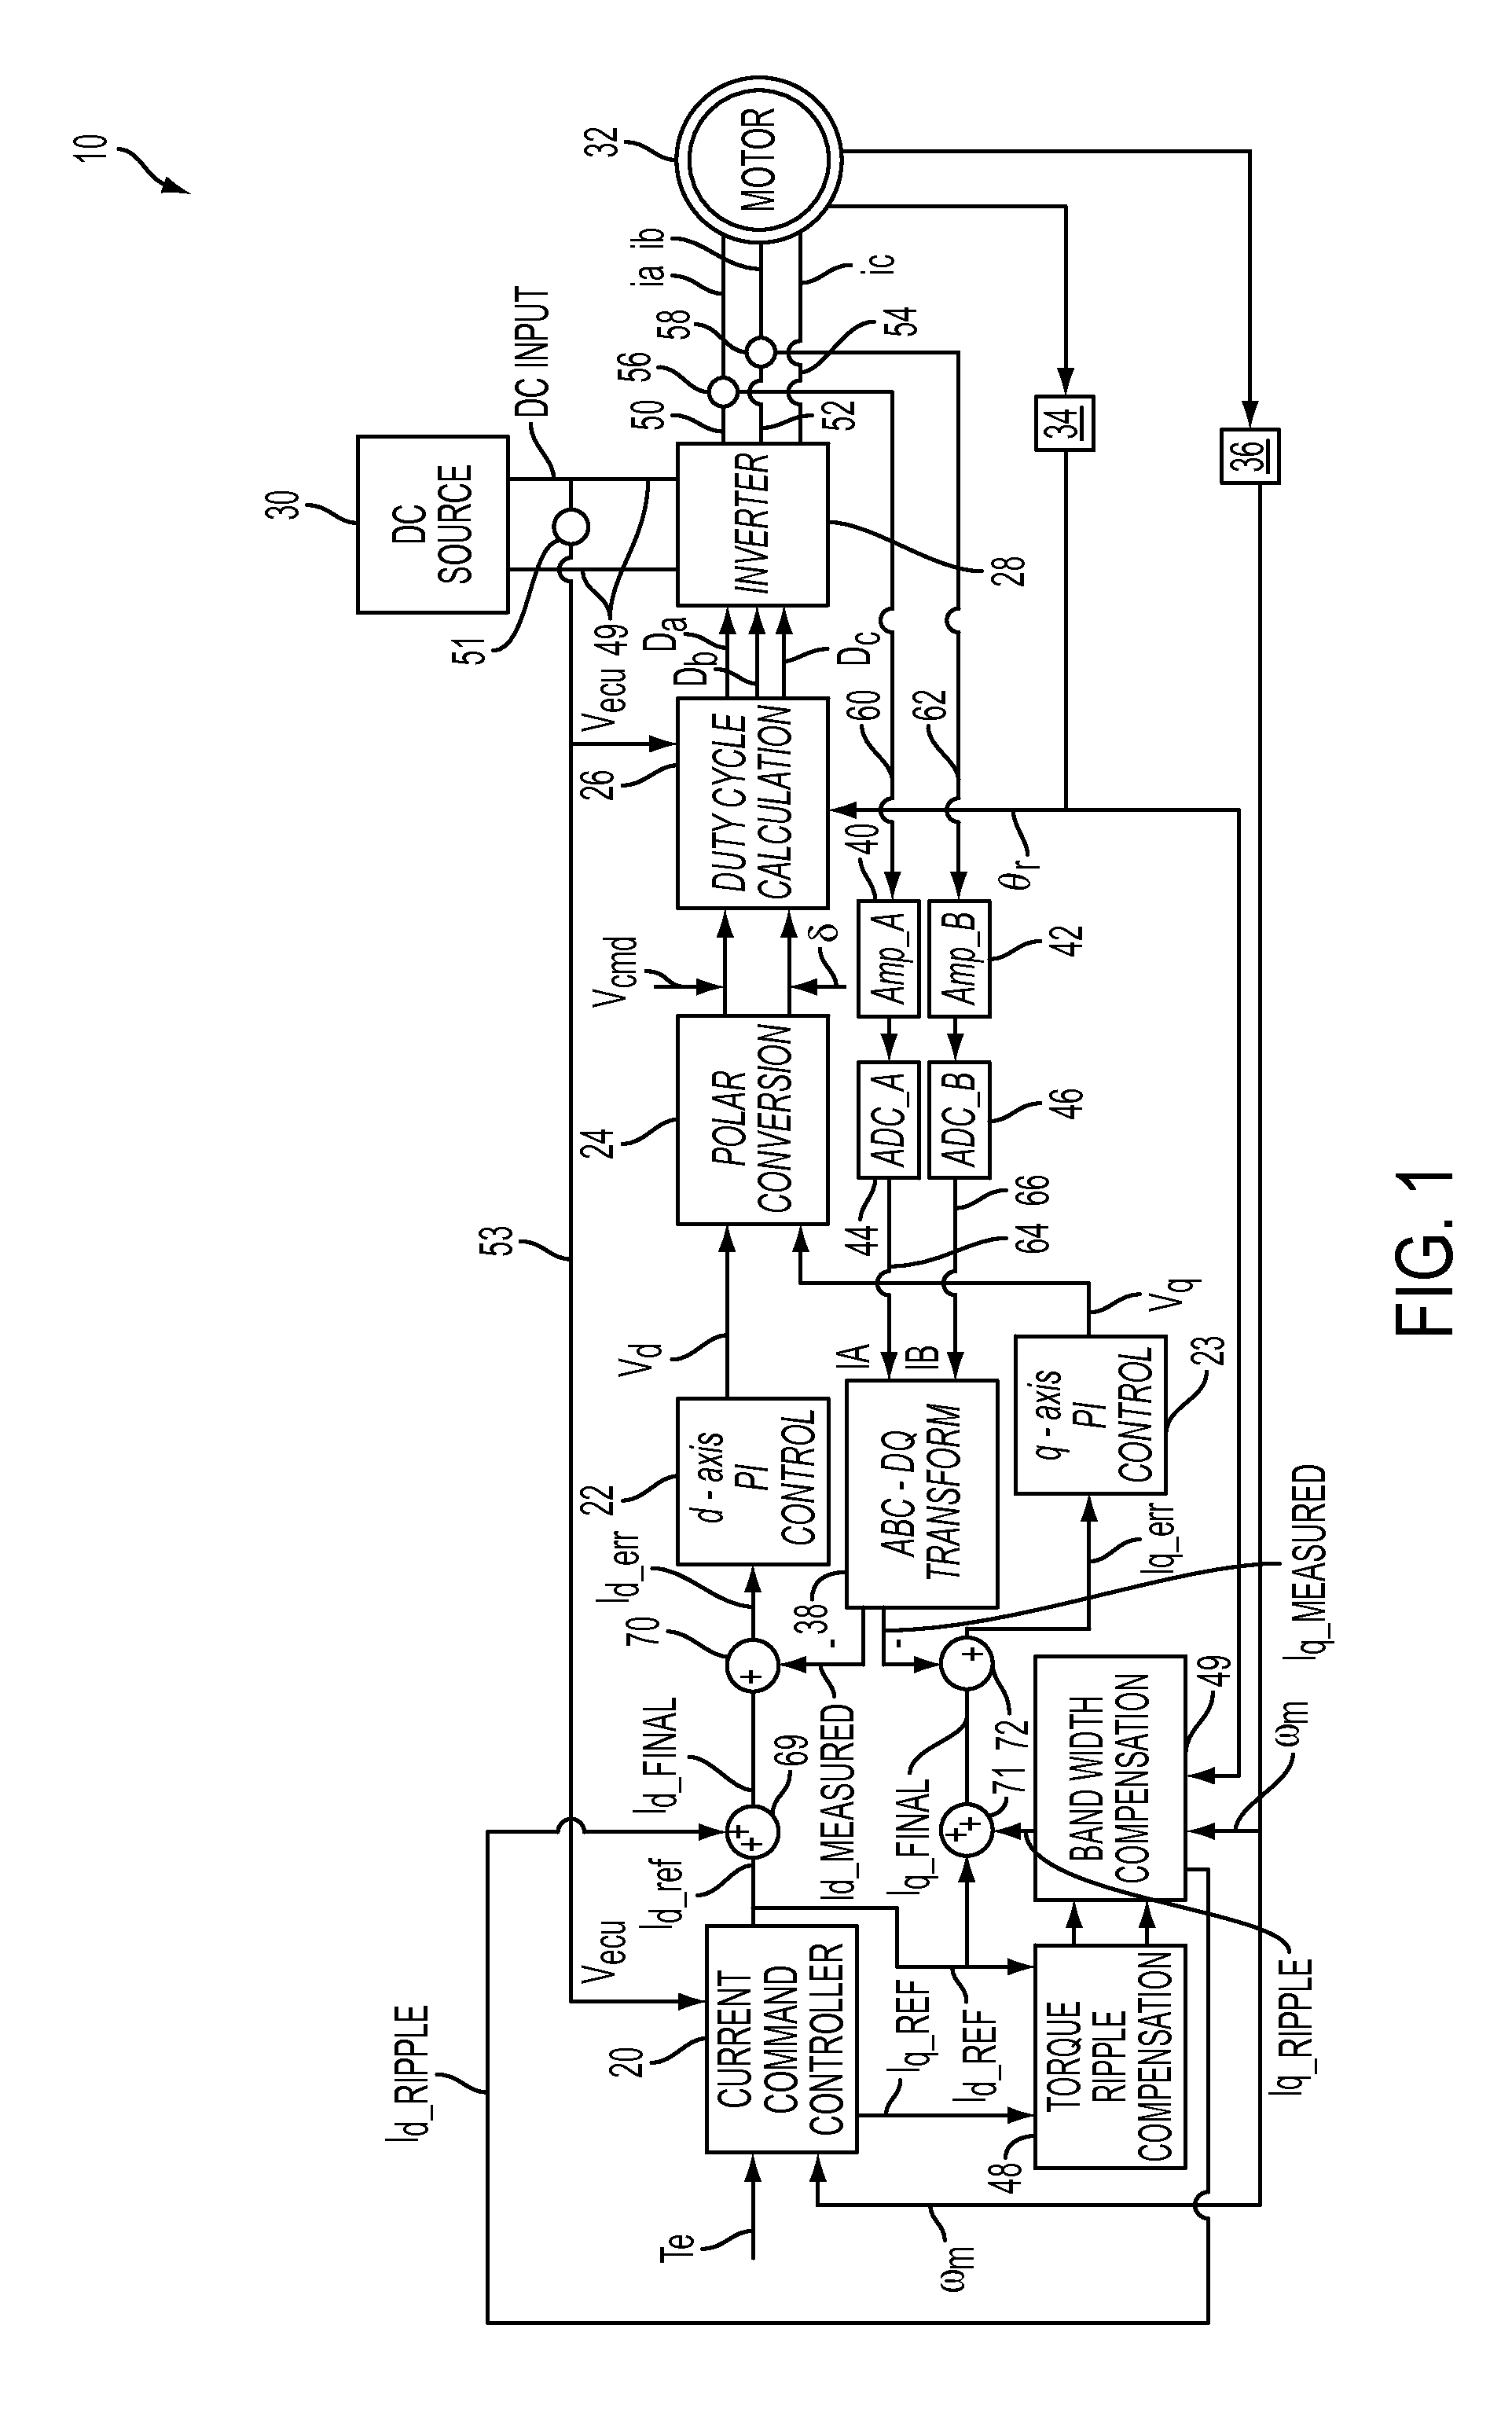 Motor control system having bandwith compensation